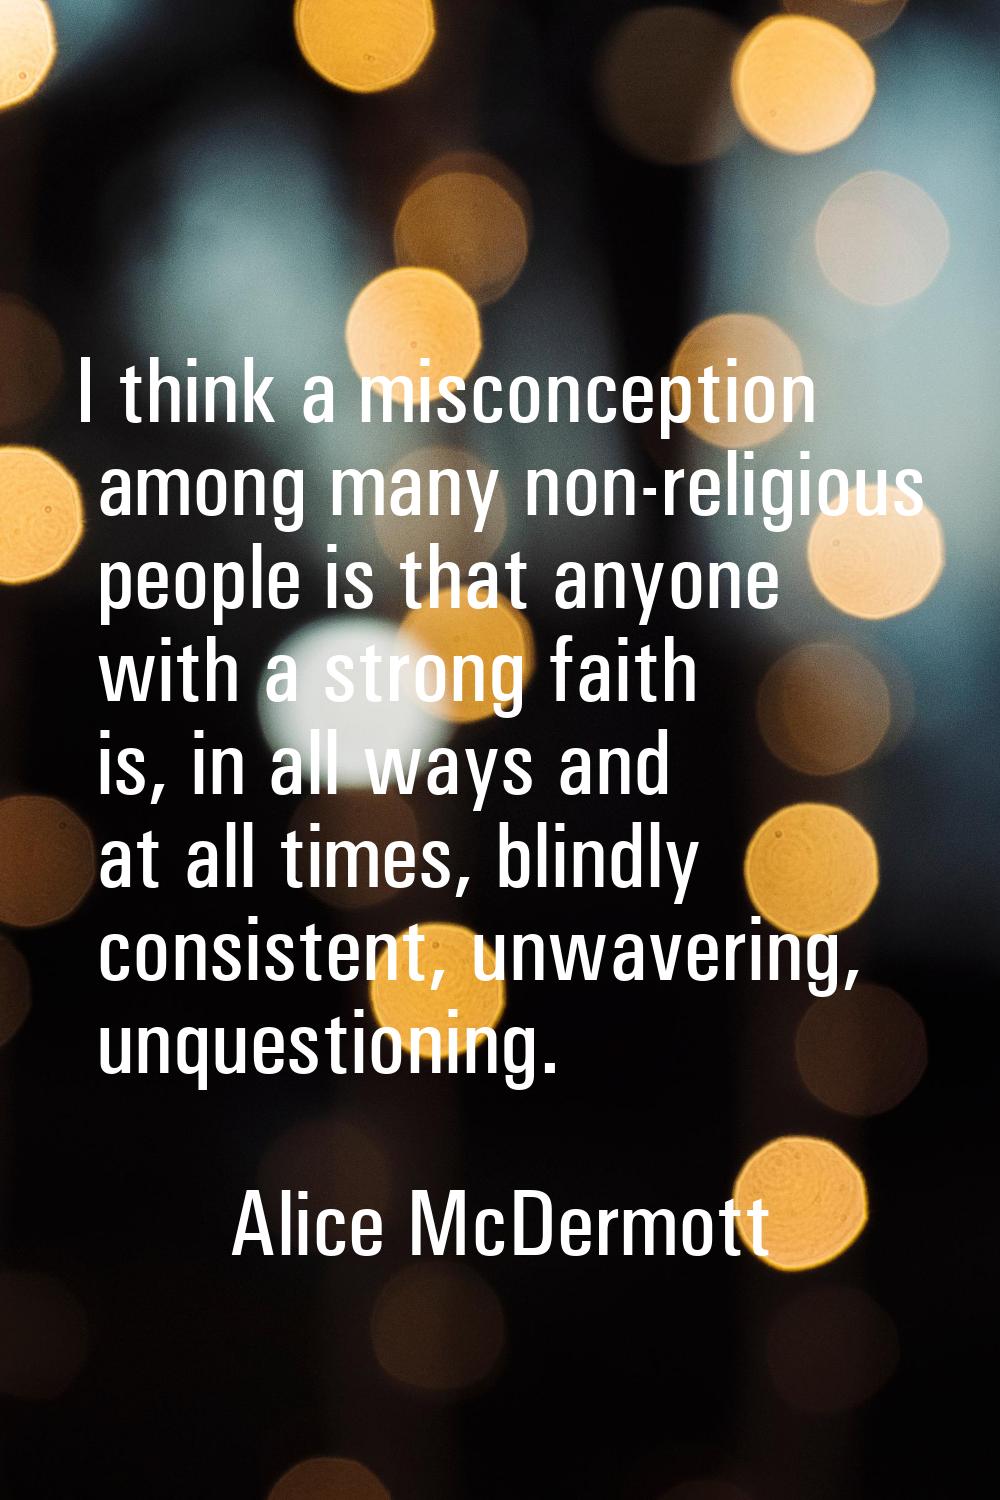 I think a misconception among many non-religious people is that anyone with a strong faith is, in a